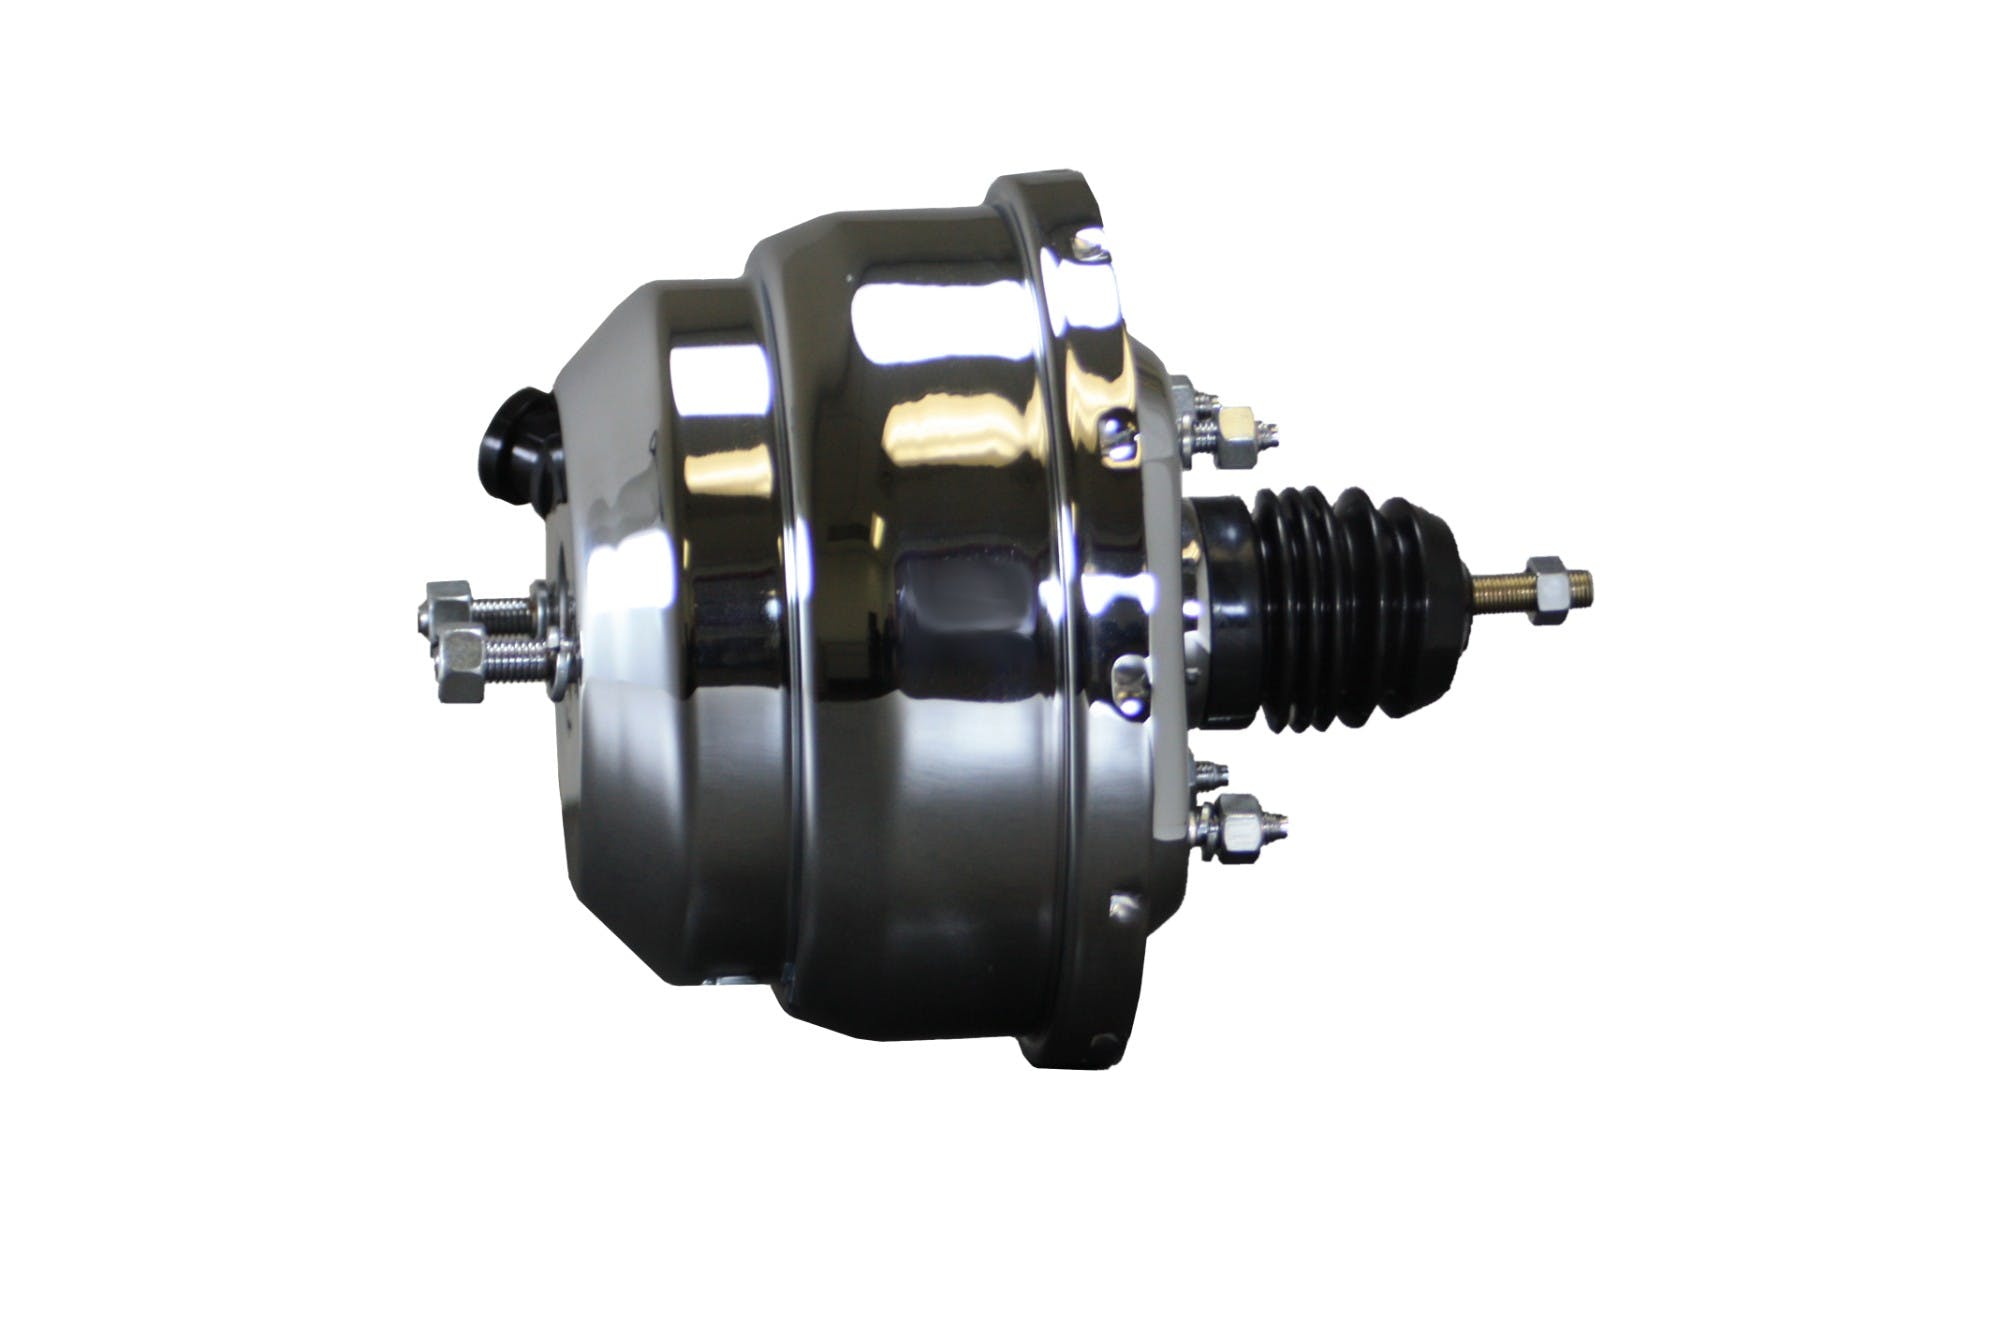 LEED Brakes PBKT1049 8 inch Dual Chrome Booster